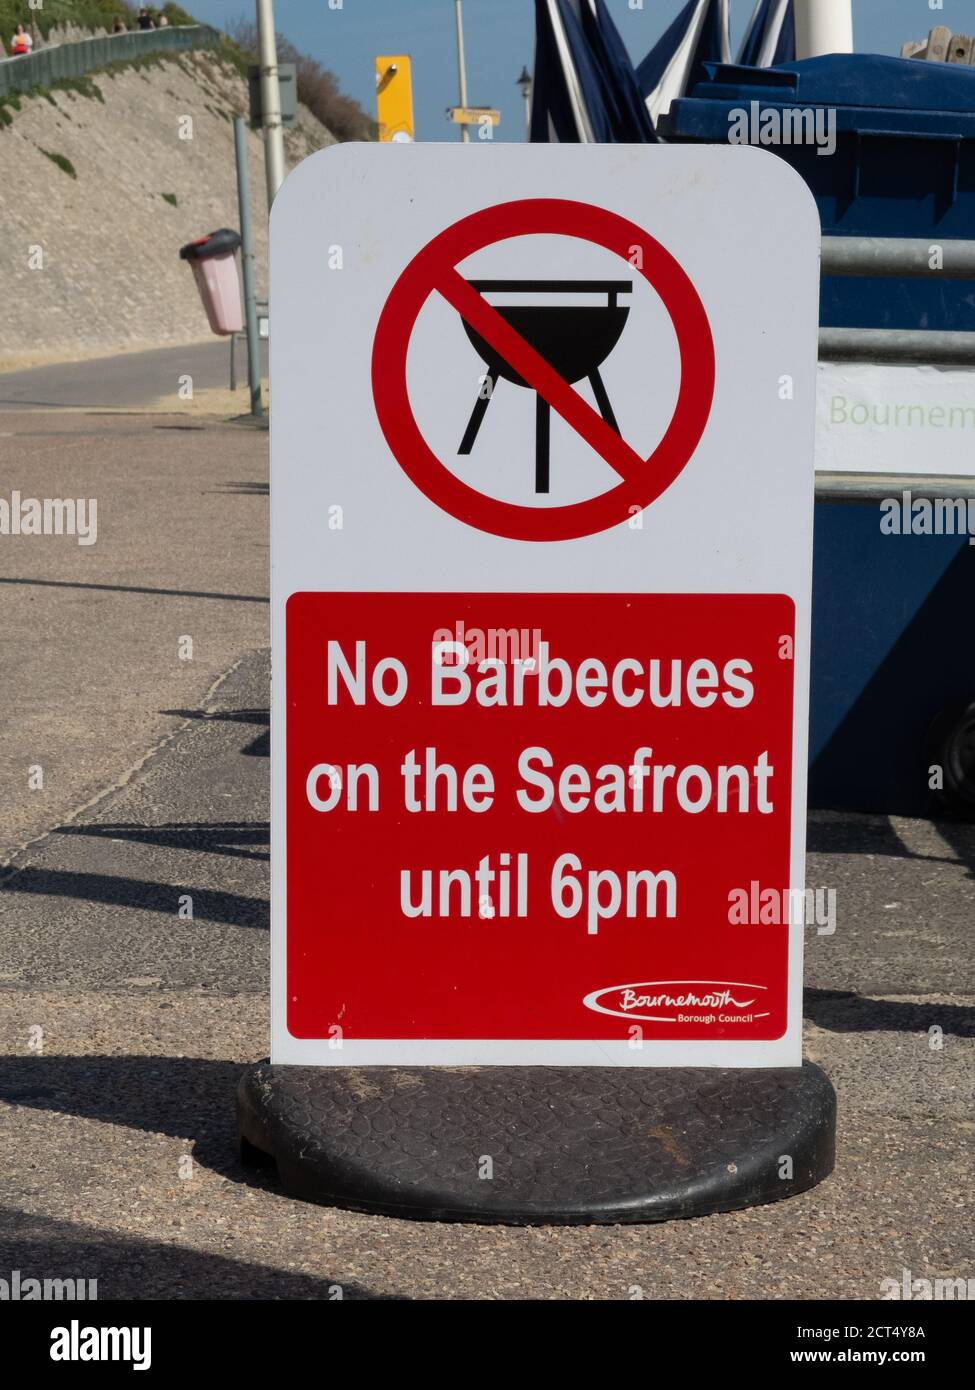 A sign on the promenade at Fisherman’s Walk in Bournemouth saying No Barbecues on the seafront until 6pm. 23 April 2013. Photo: Neil Turner Stock Photo